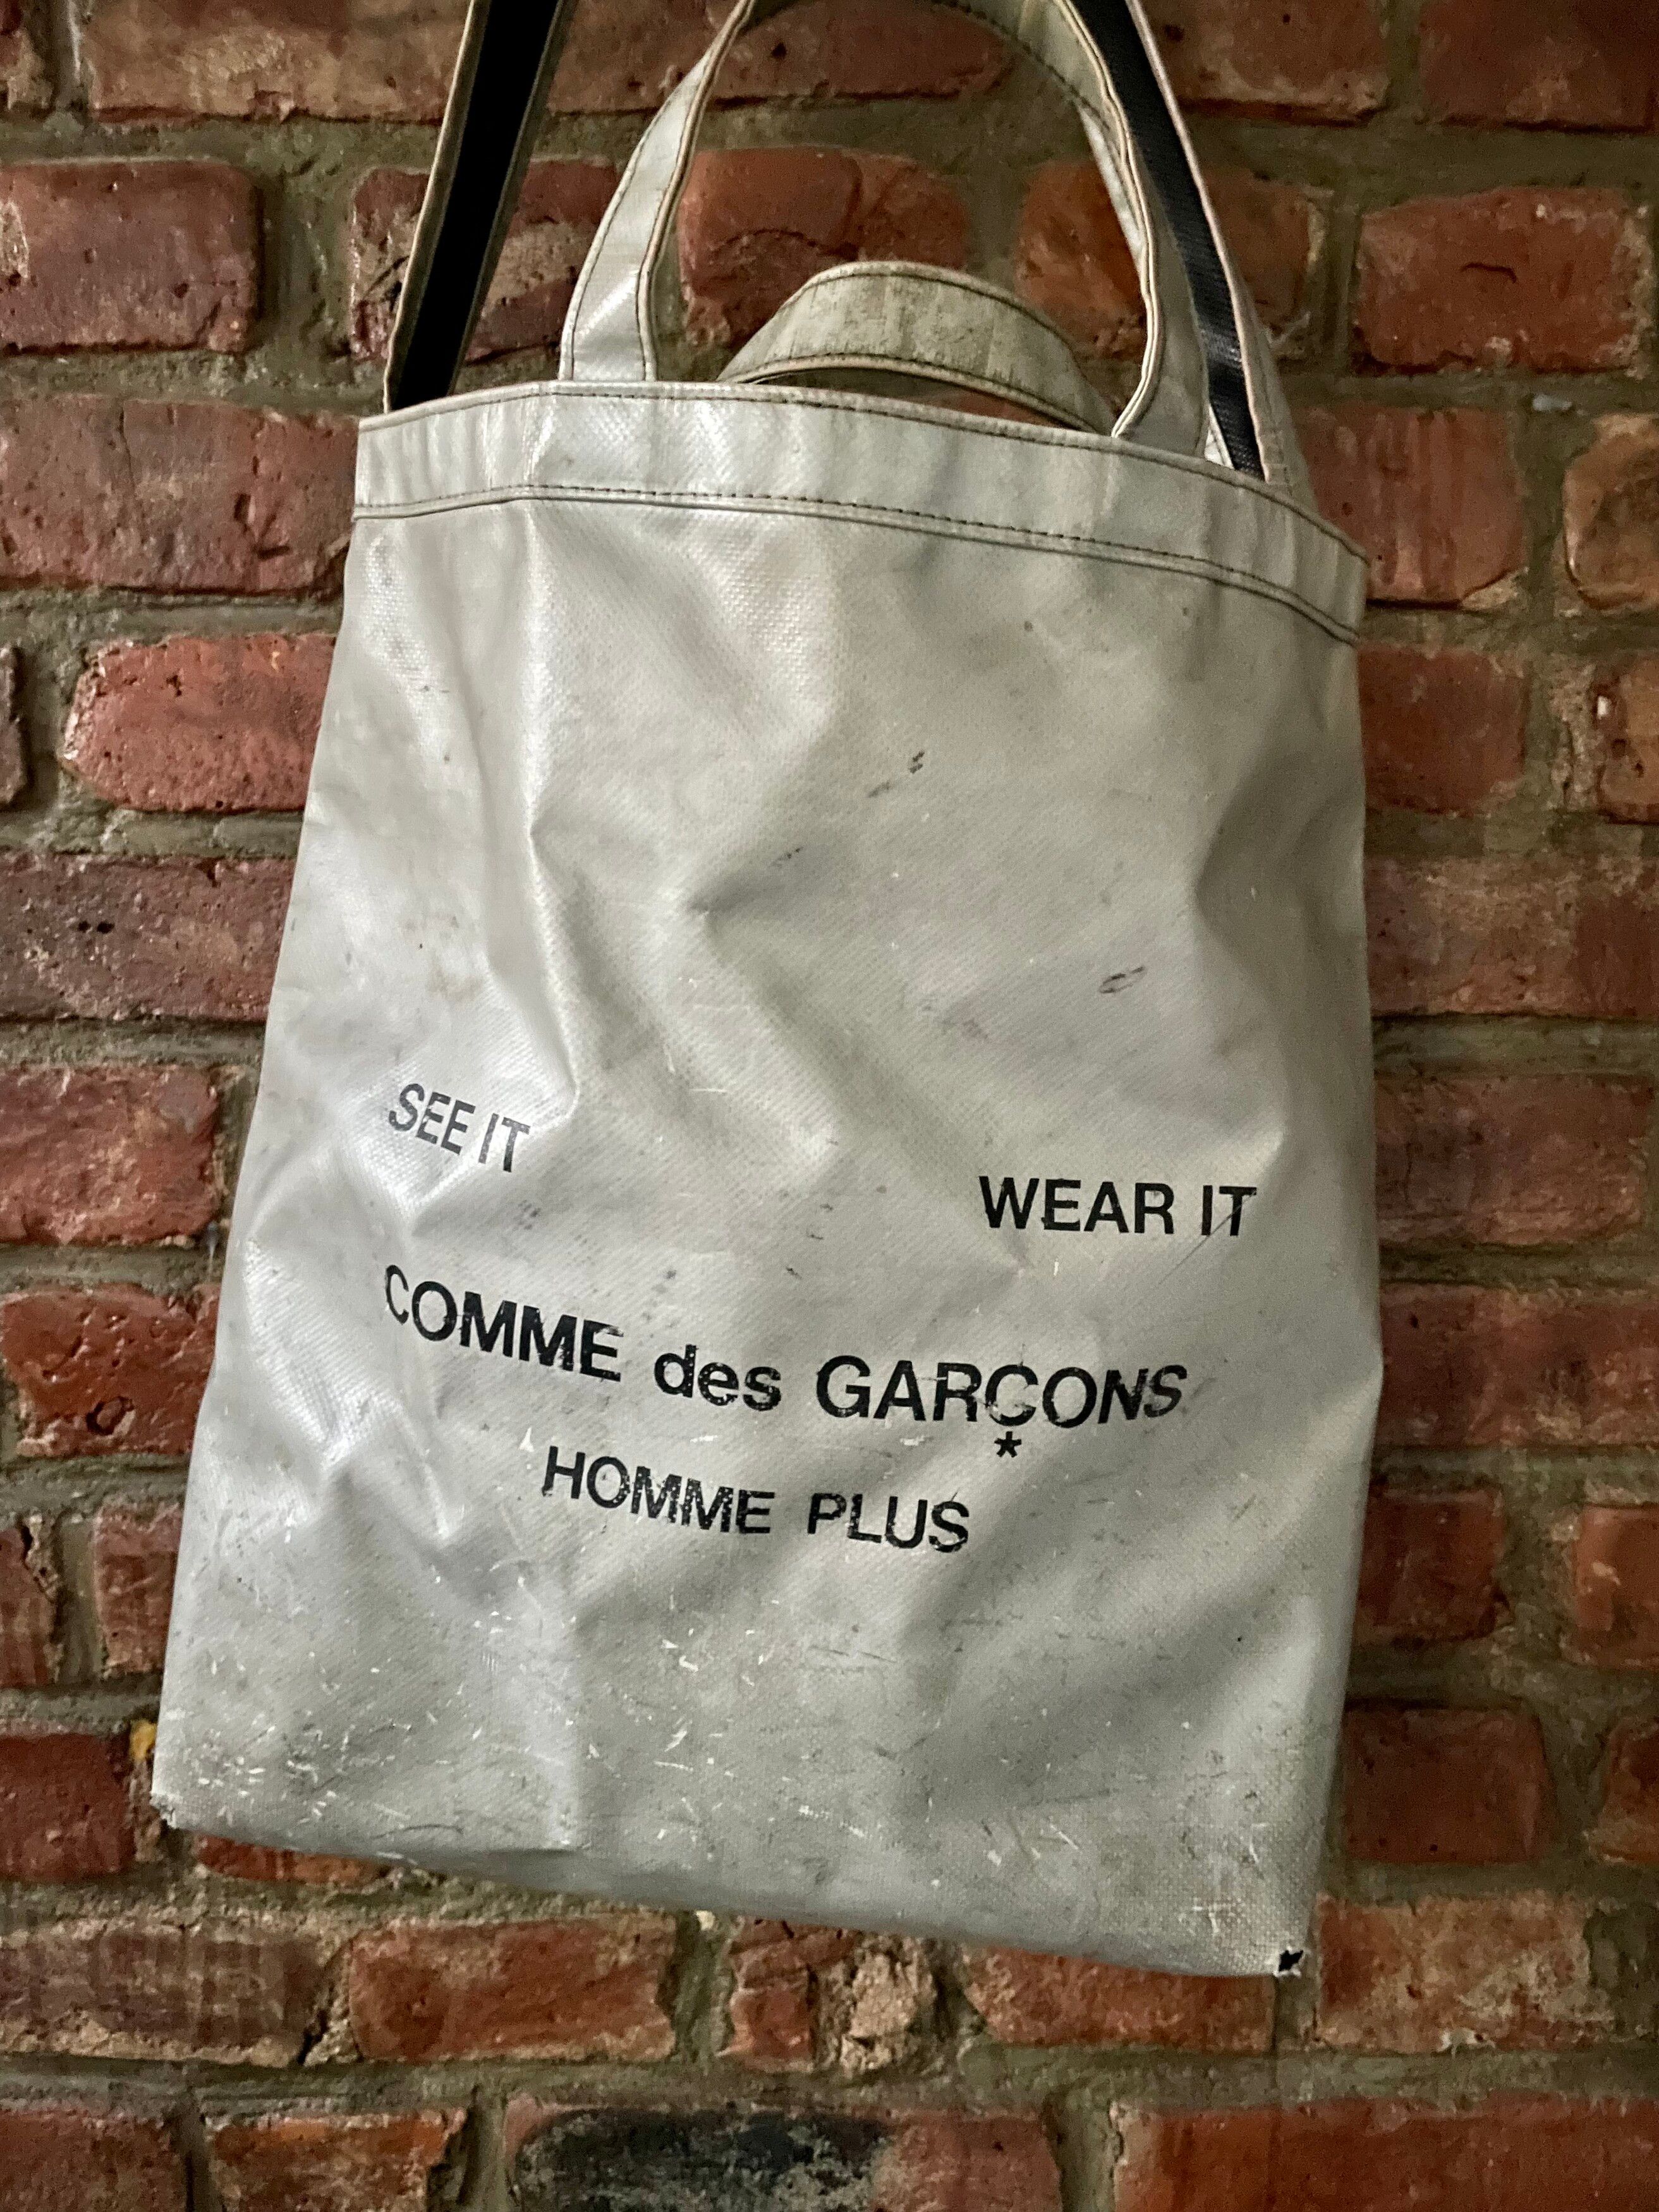 Comme des Garcons AW09 SEE IT WEAR IT Tote Bag | Grailed